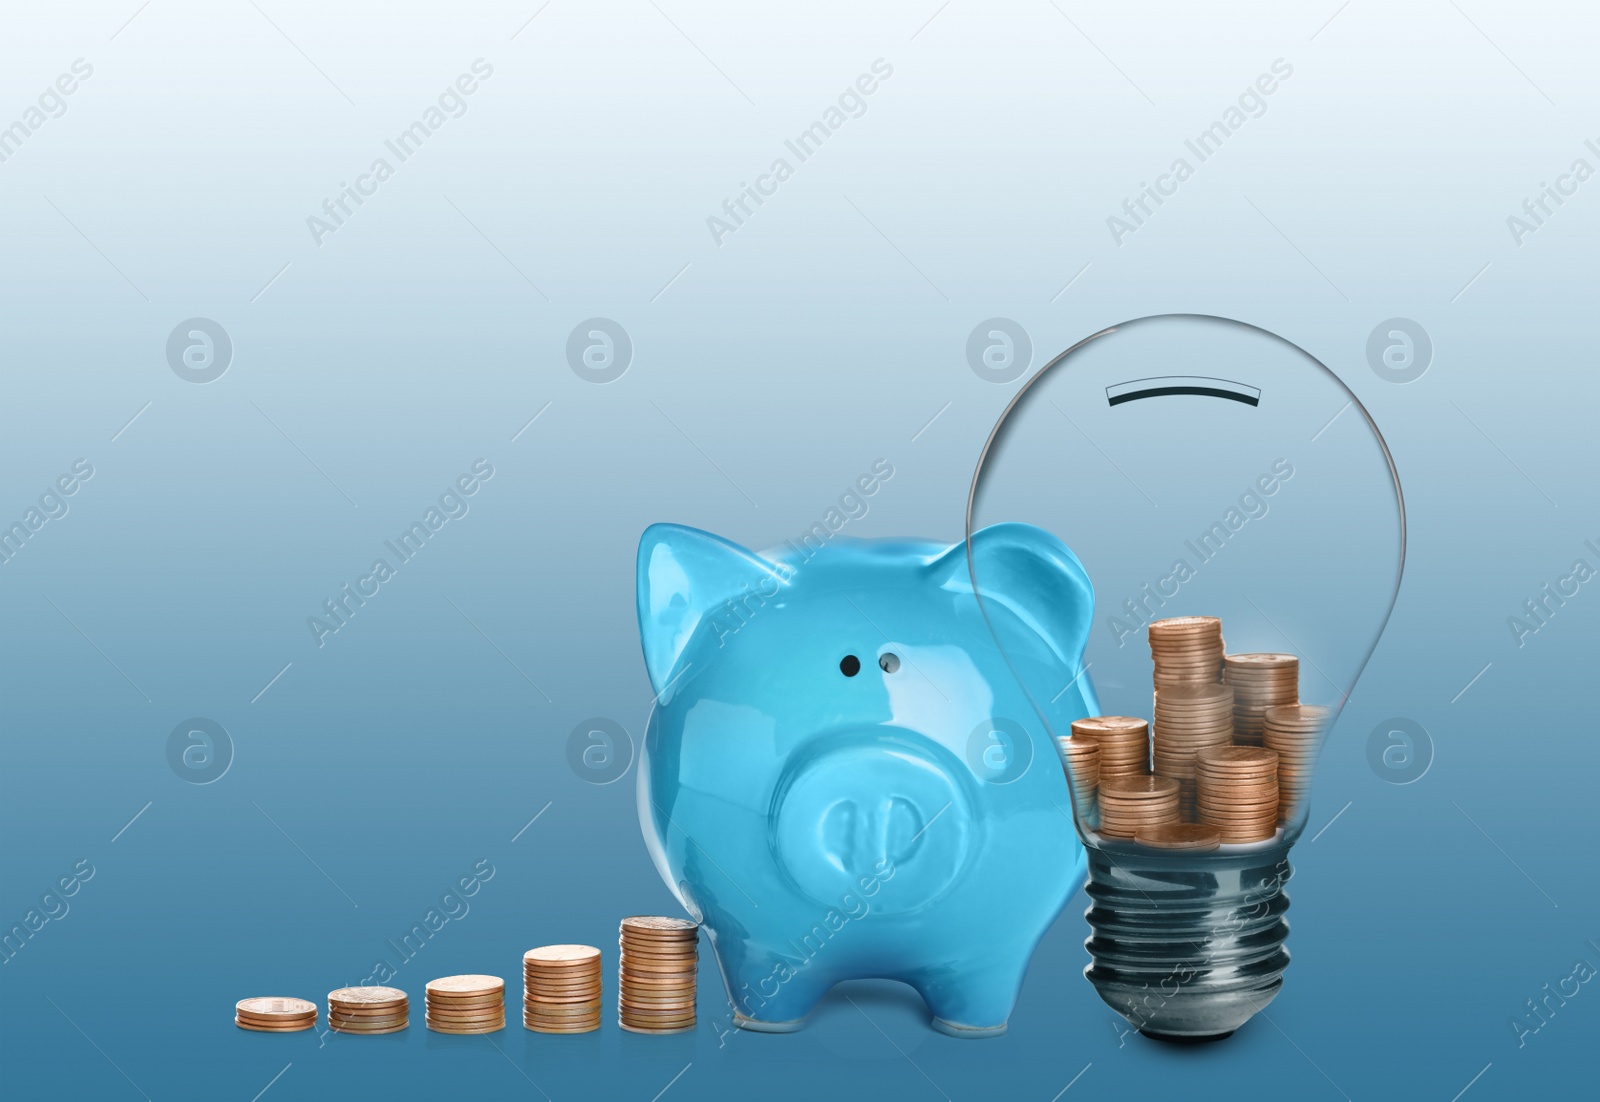 Image of Light bulb with stacked coins and piggy bank on light background. Energy efficiency, loan, property or business idea concepts